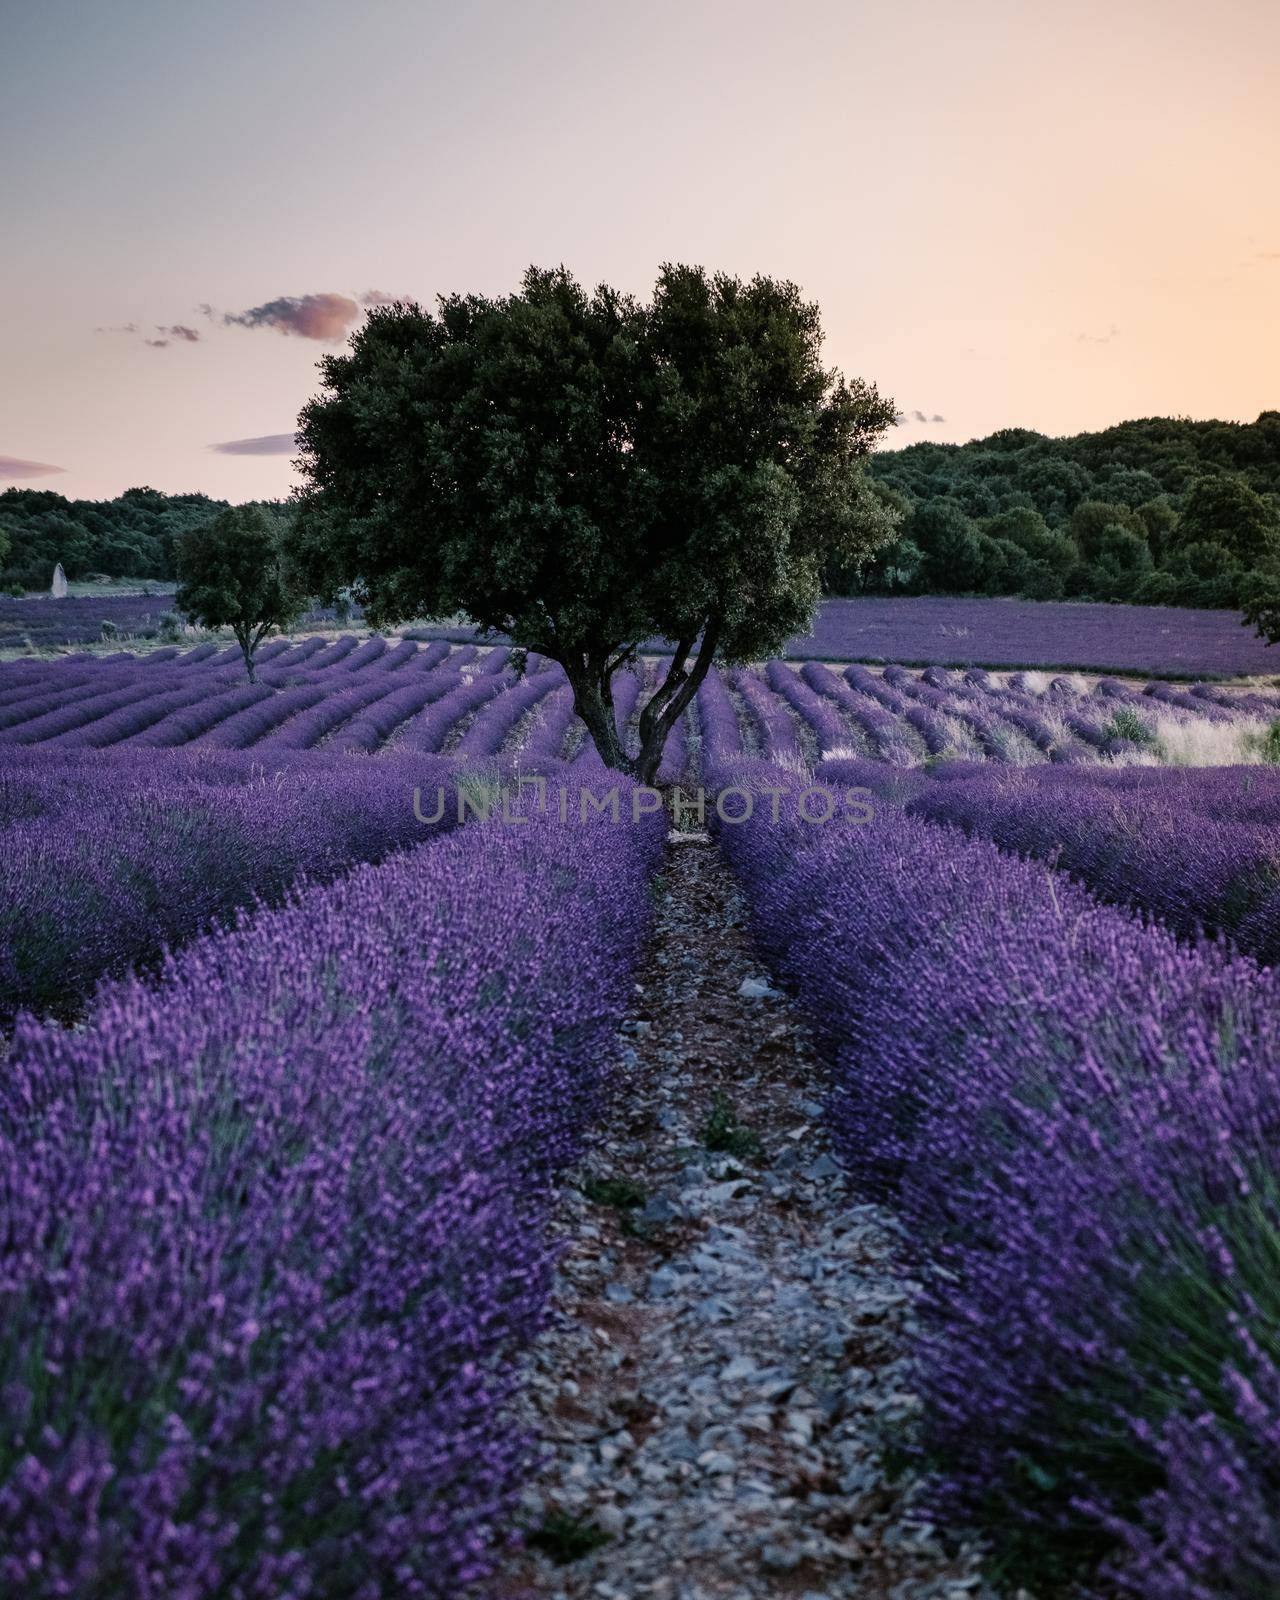 Ardeche lavender fields in the south of France during sunset, Lavender fields in Ardeche in southeast France.Europe